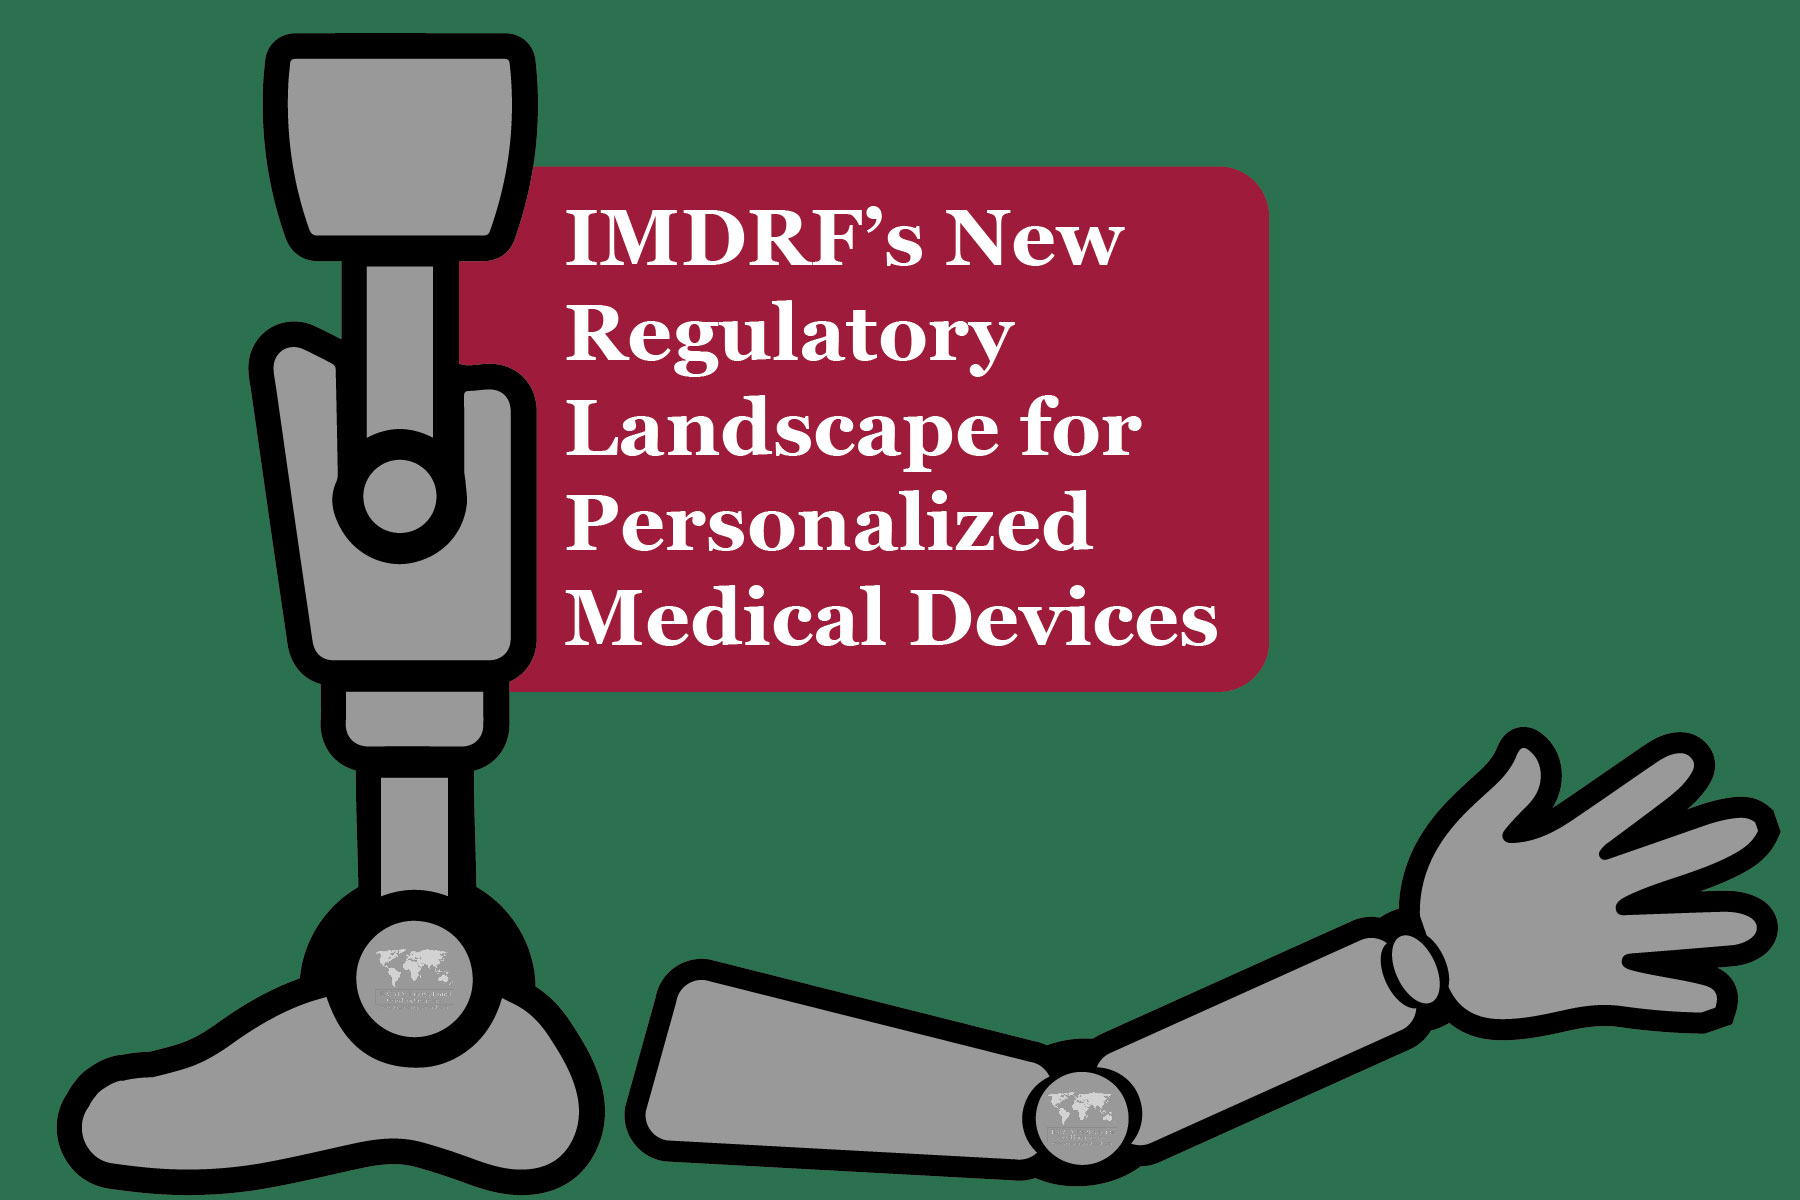 IMDRF’s New Regulatory Landscape for Personalized Medical Devices